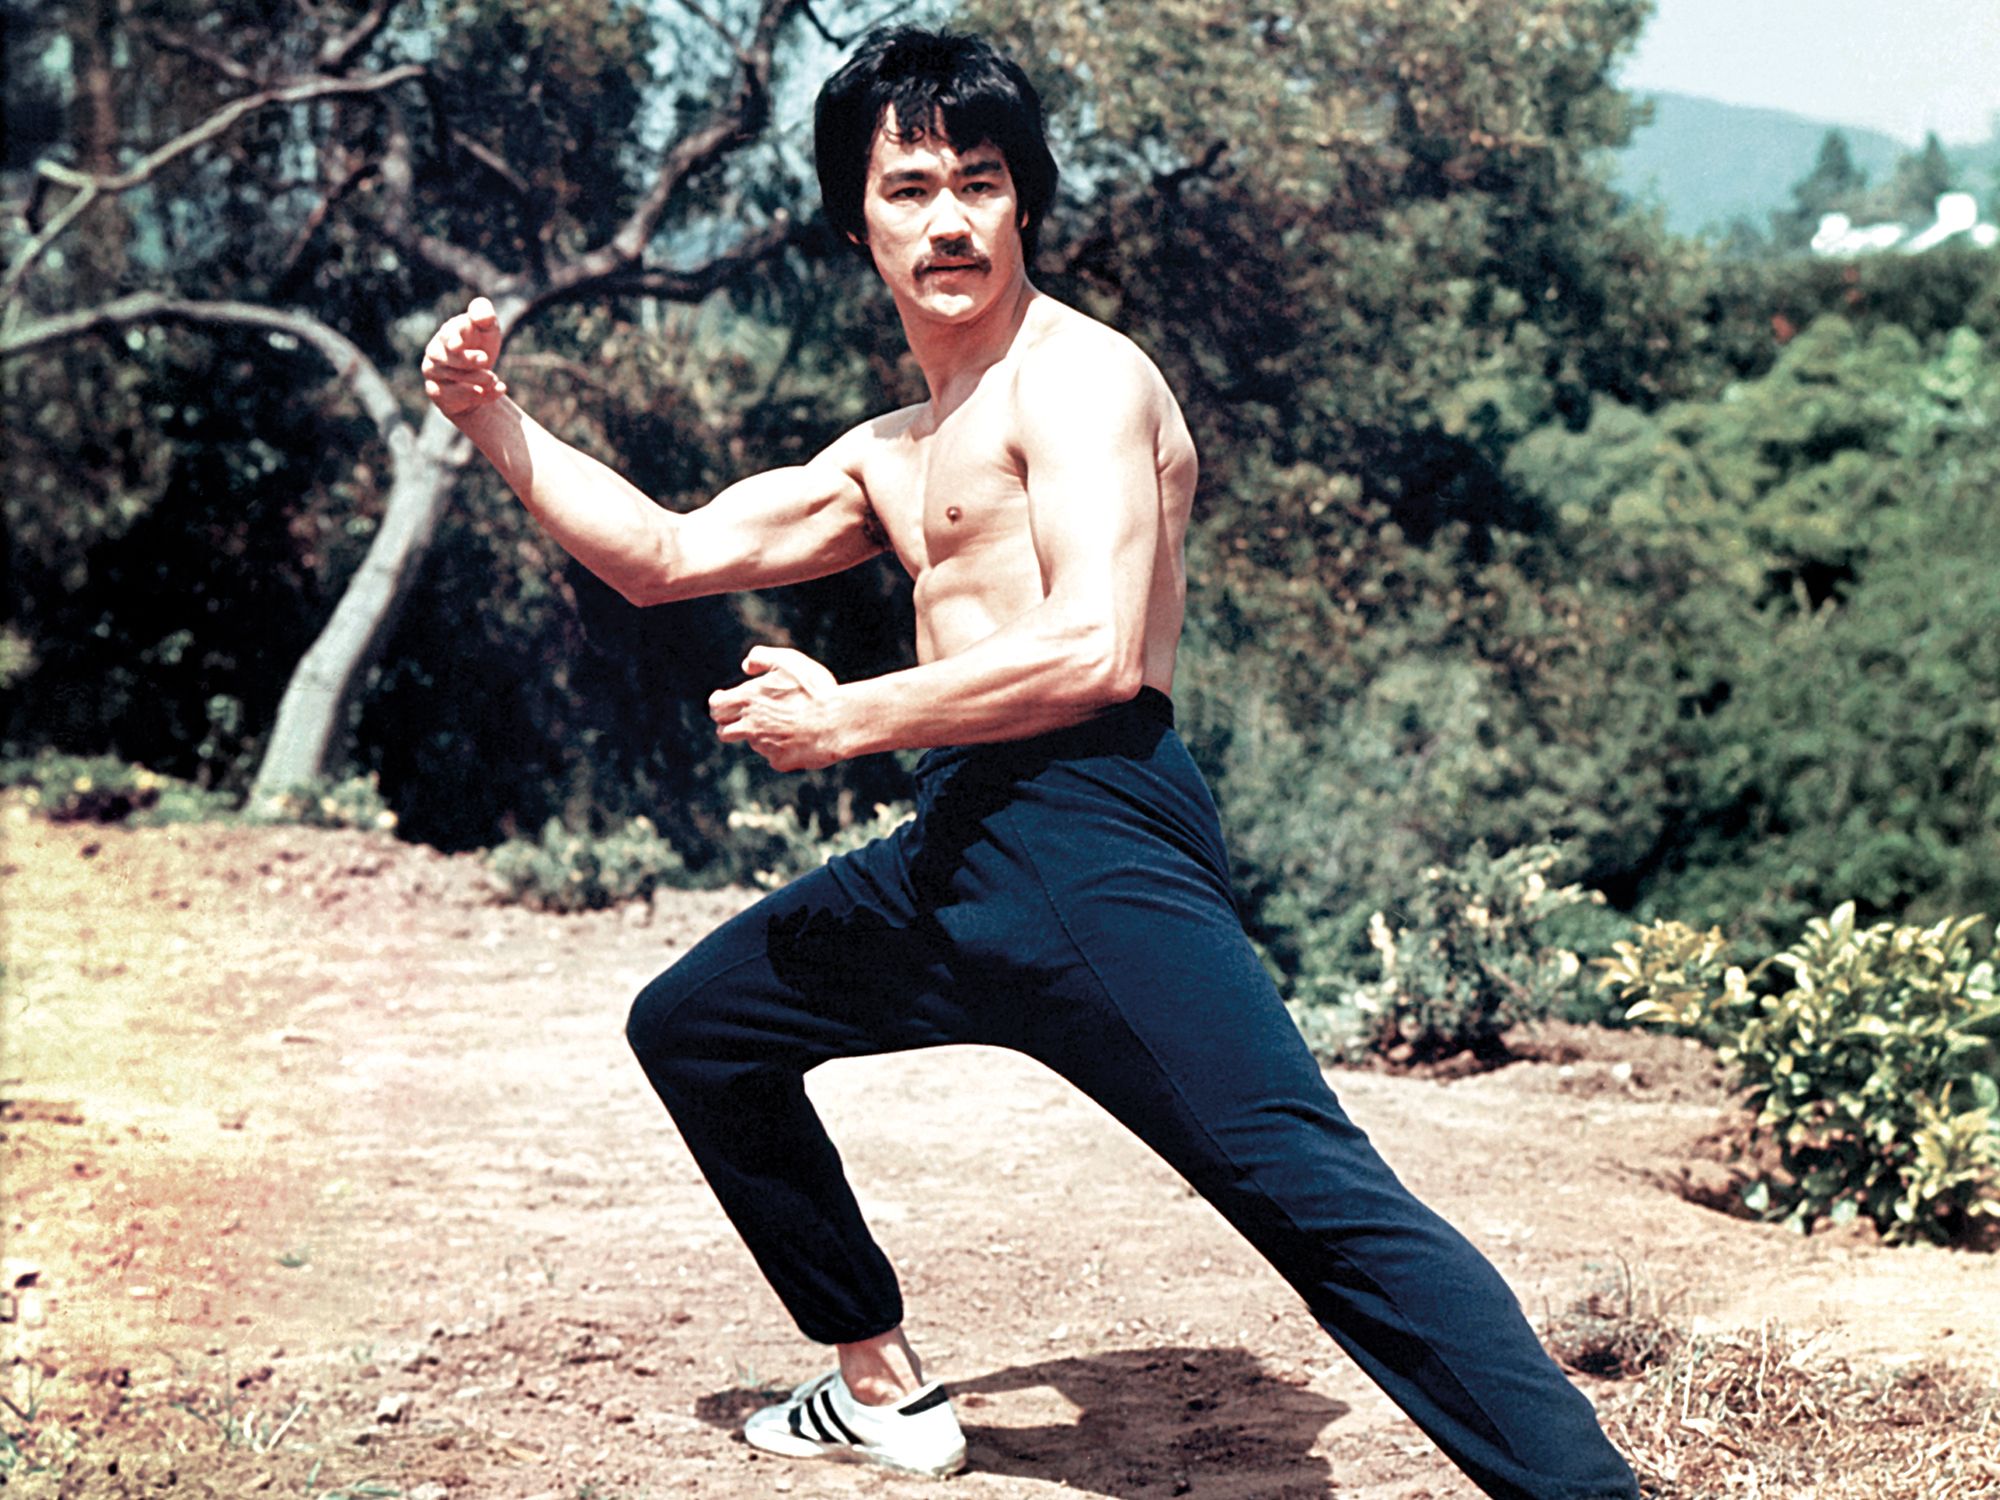 Rare Photos Of Bruce Lee Released On The Anniversary Of His Death